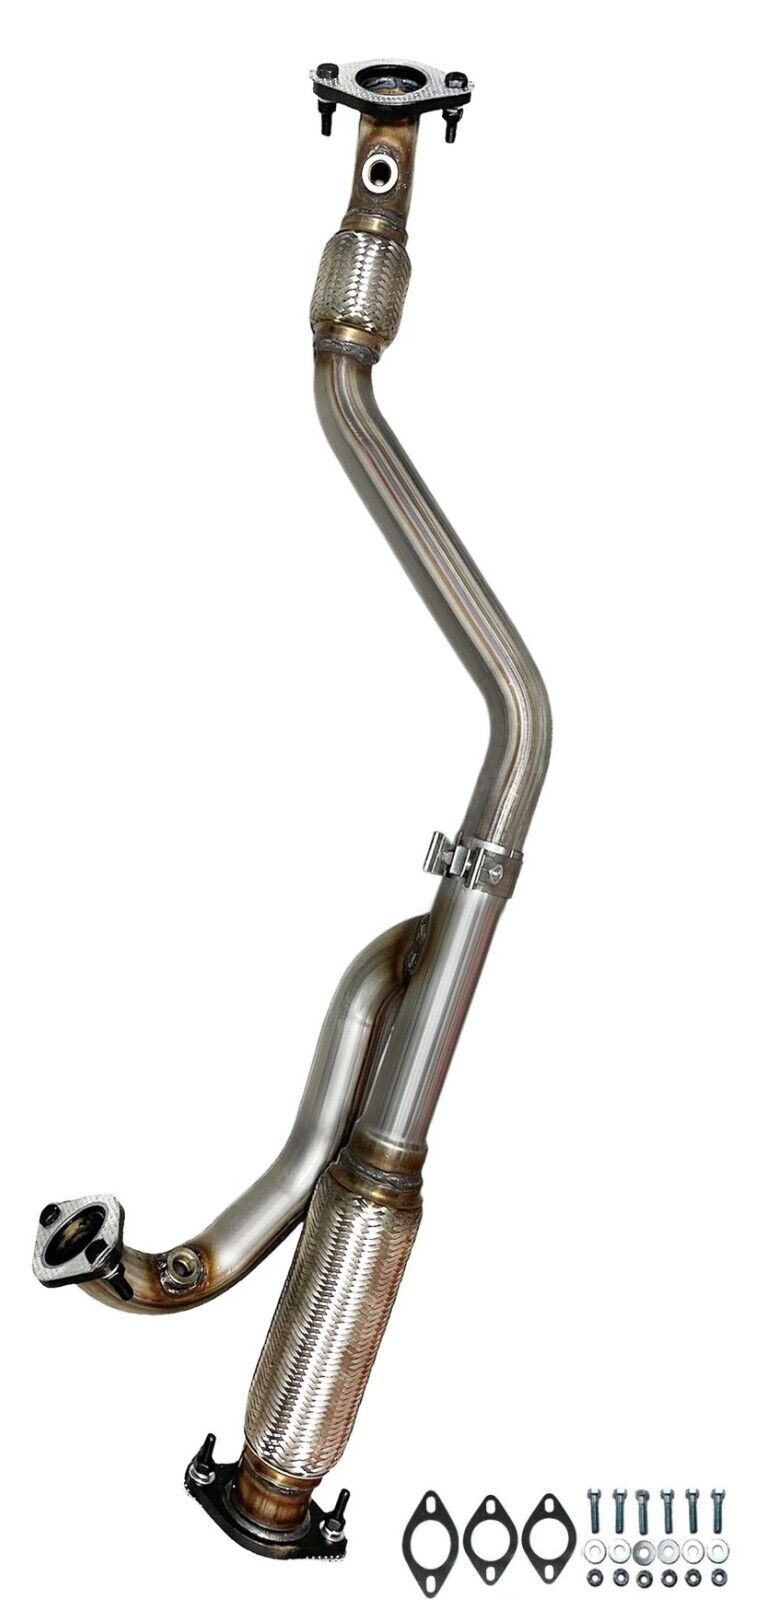 Exhaust Front Flex Pipe for 2009-2017 GMC Acadia Chevy Traverse, Buick Enclave